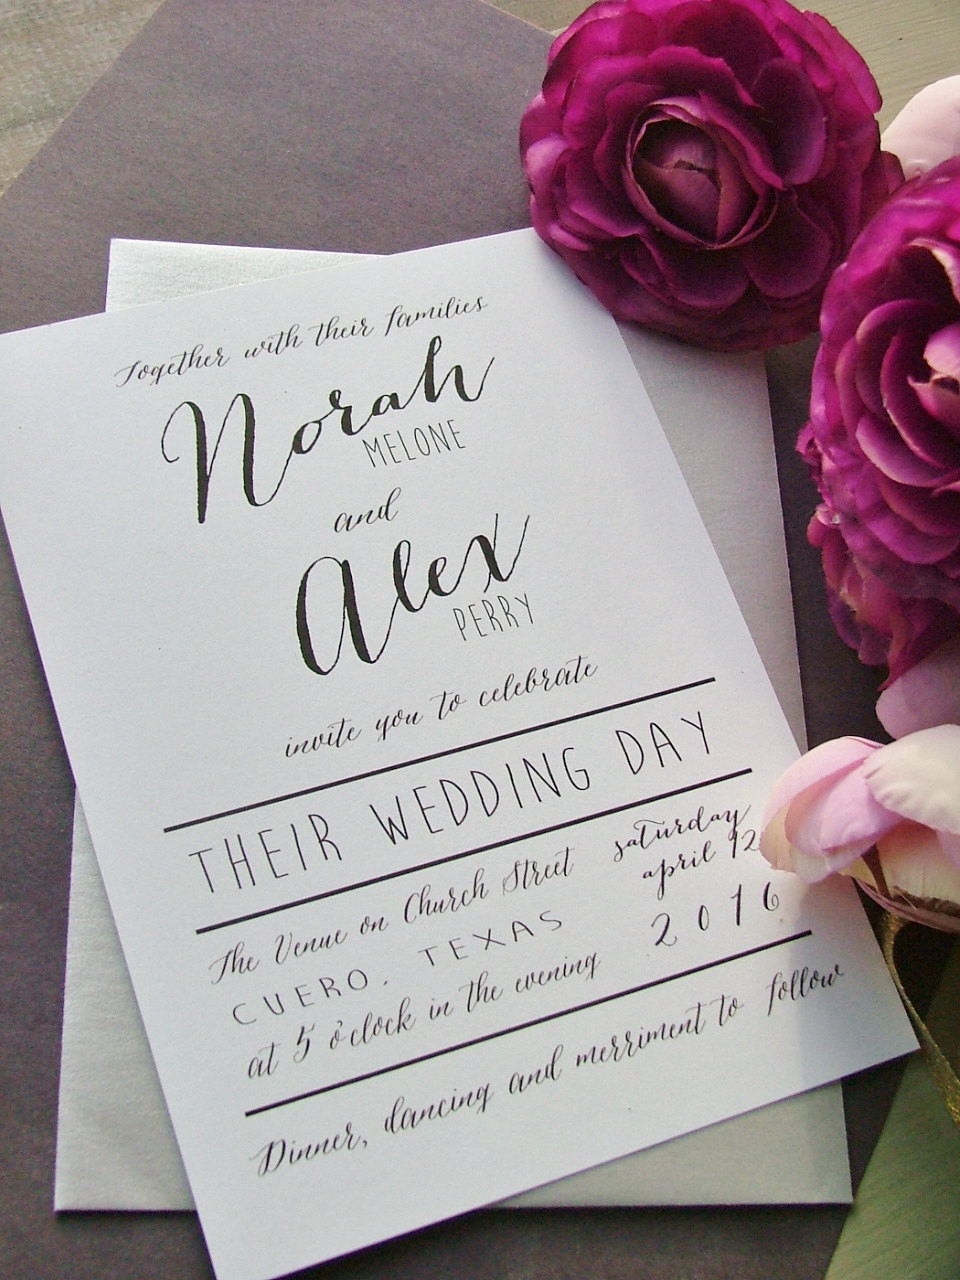 Wedding Invitations Pictures
 Top 10 Wedding Invitation Trends For 2017